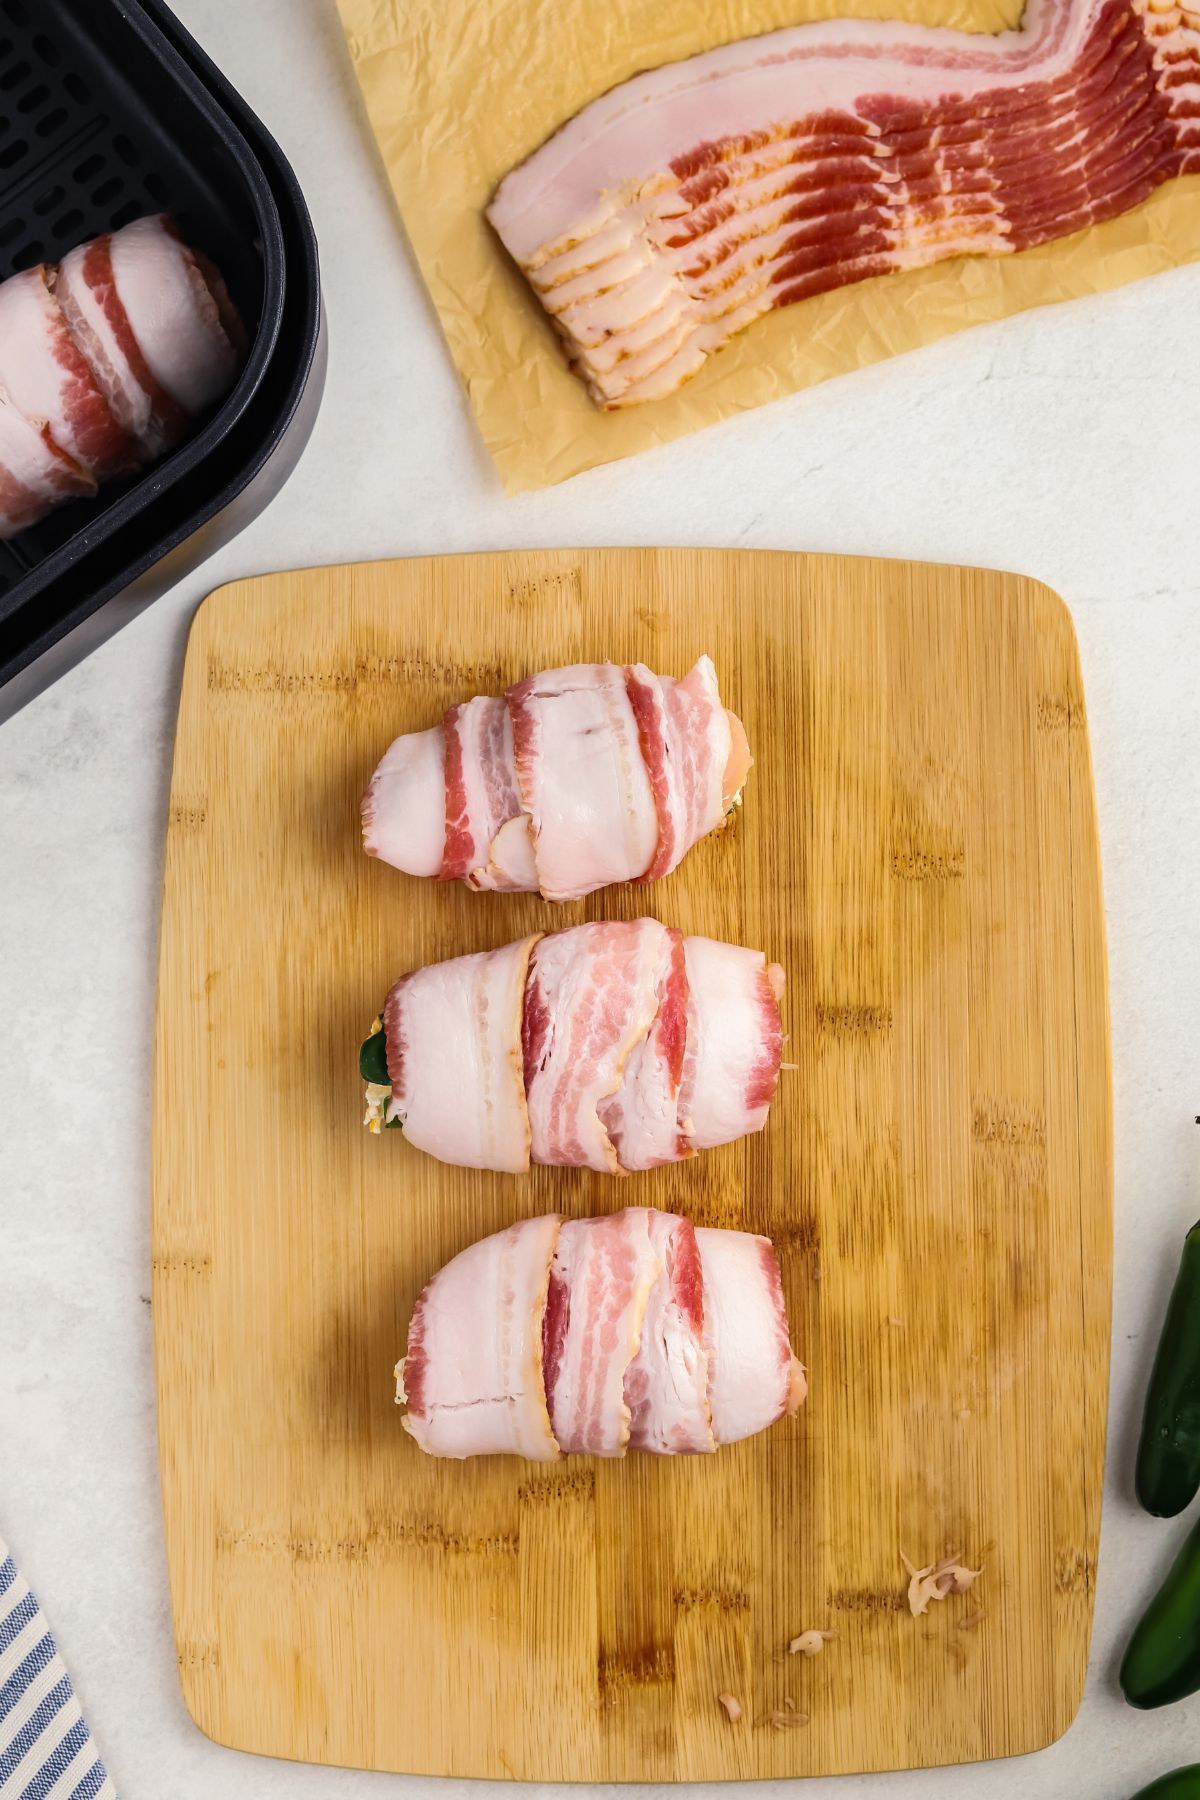 Bacon wrapped chicken breasts over jalapenos